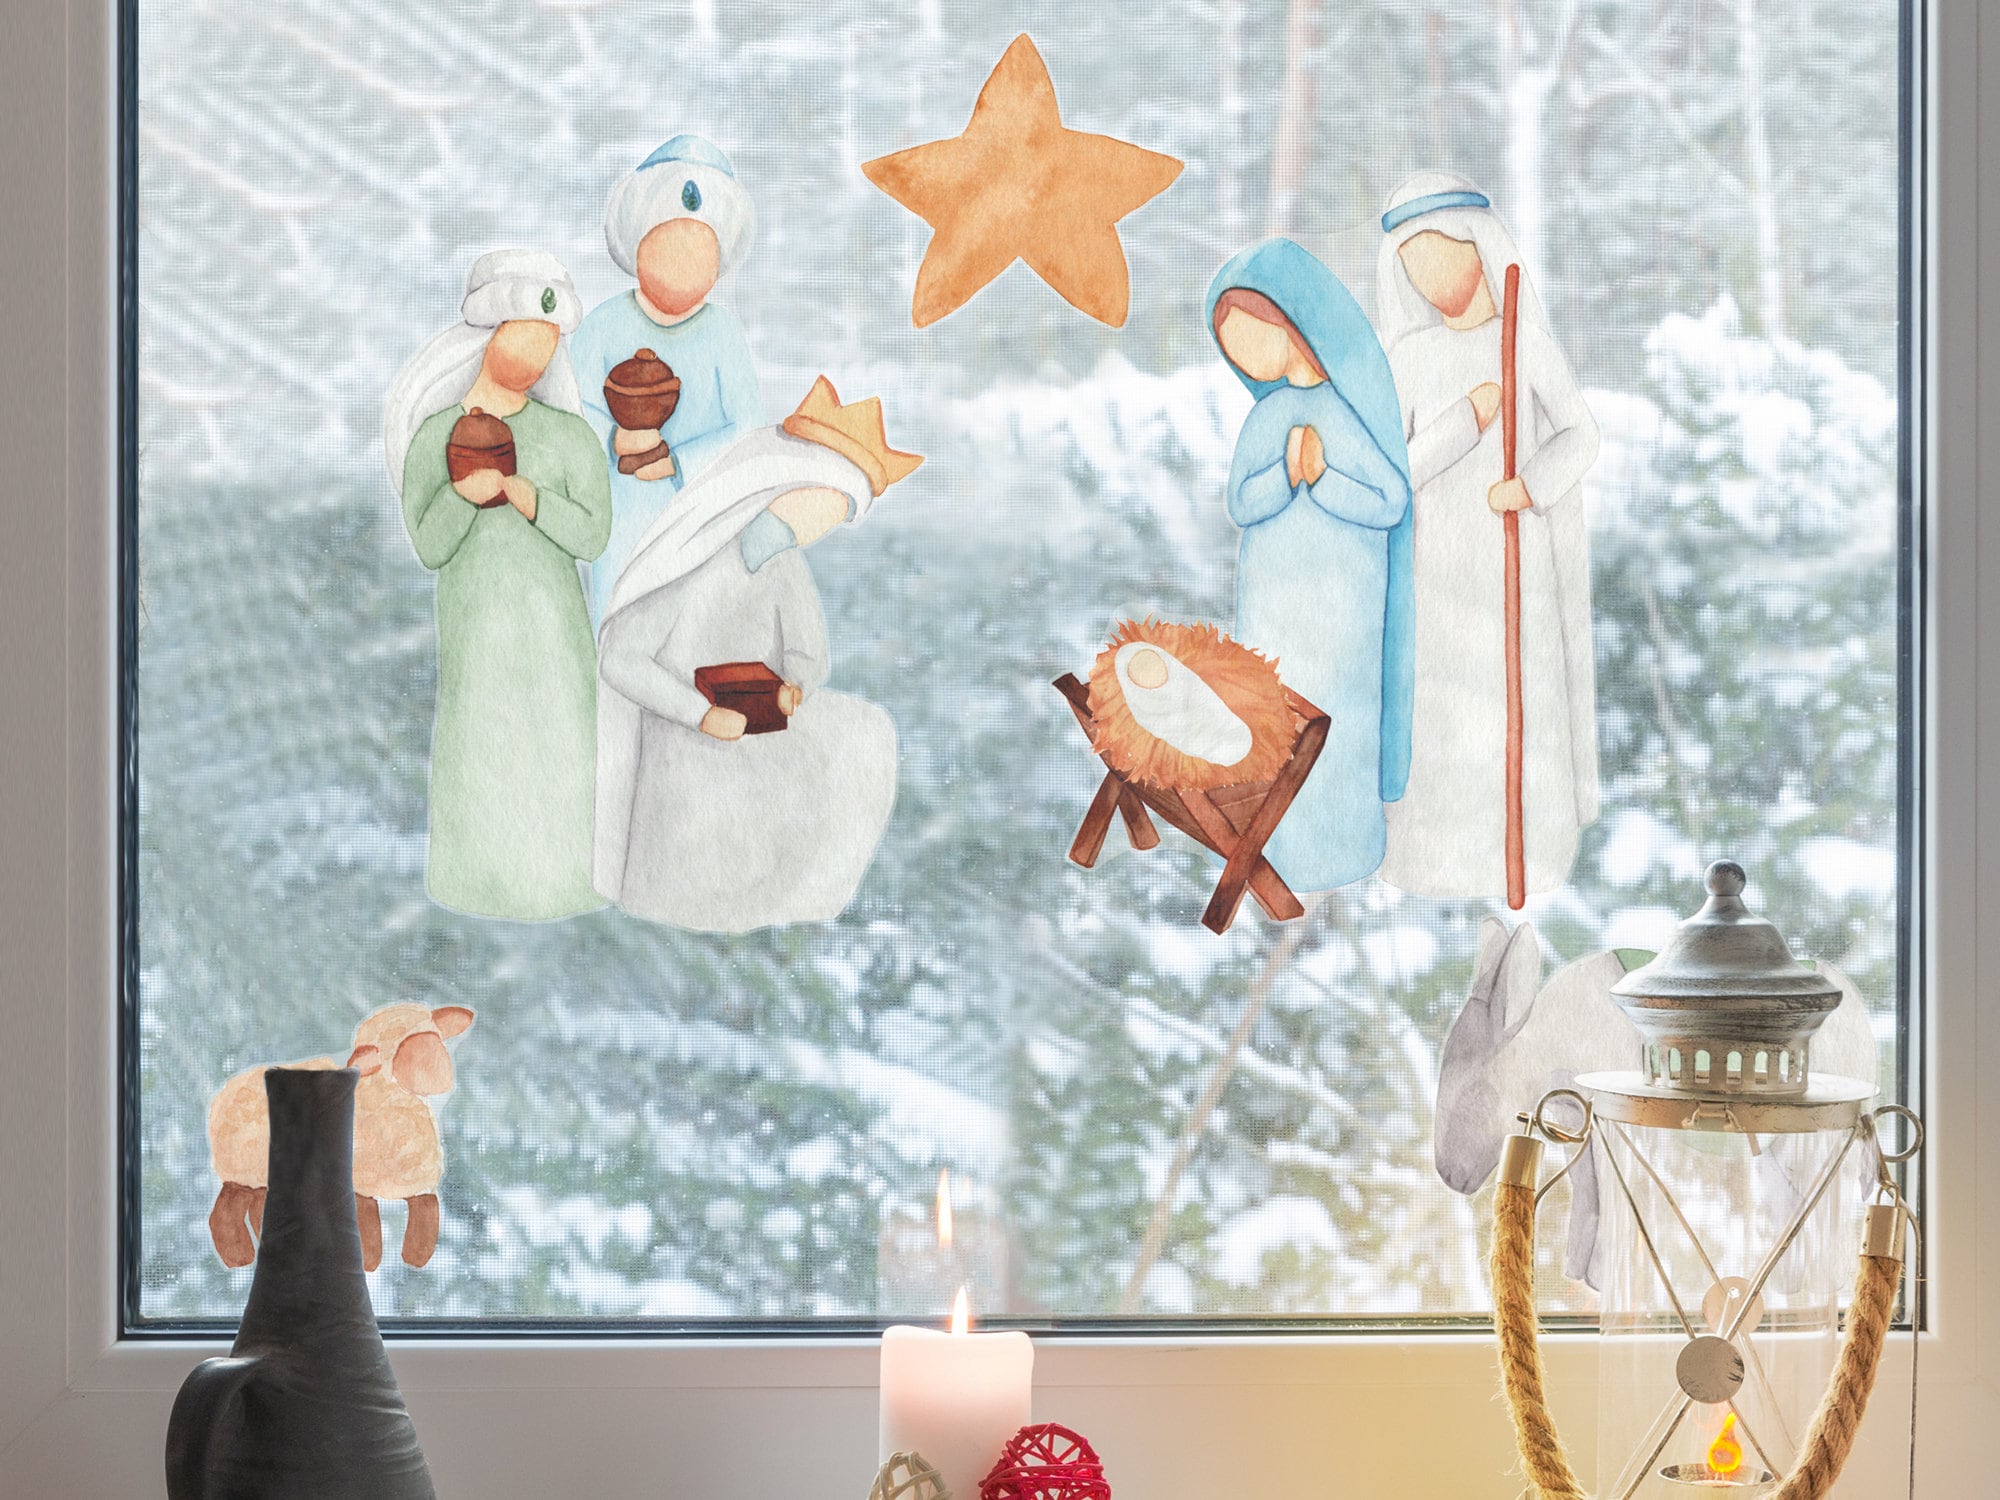 Window Flakes Christmas Window Clings - Nativity Window Clings Decorations - Reusable and Non-Adhesive Christmas Window Stickers - Holiday Win